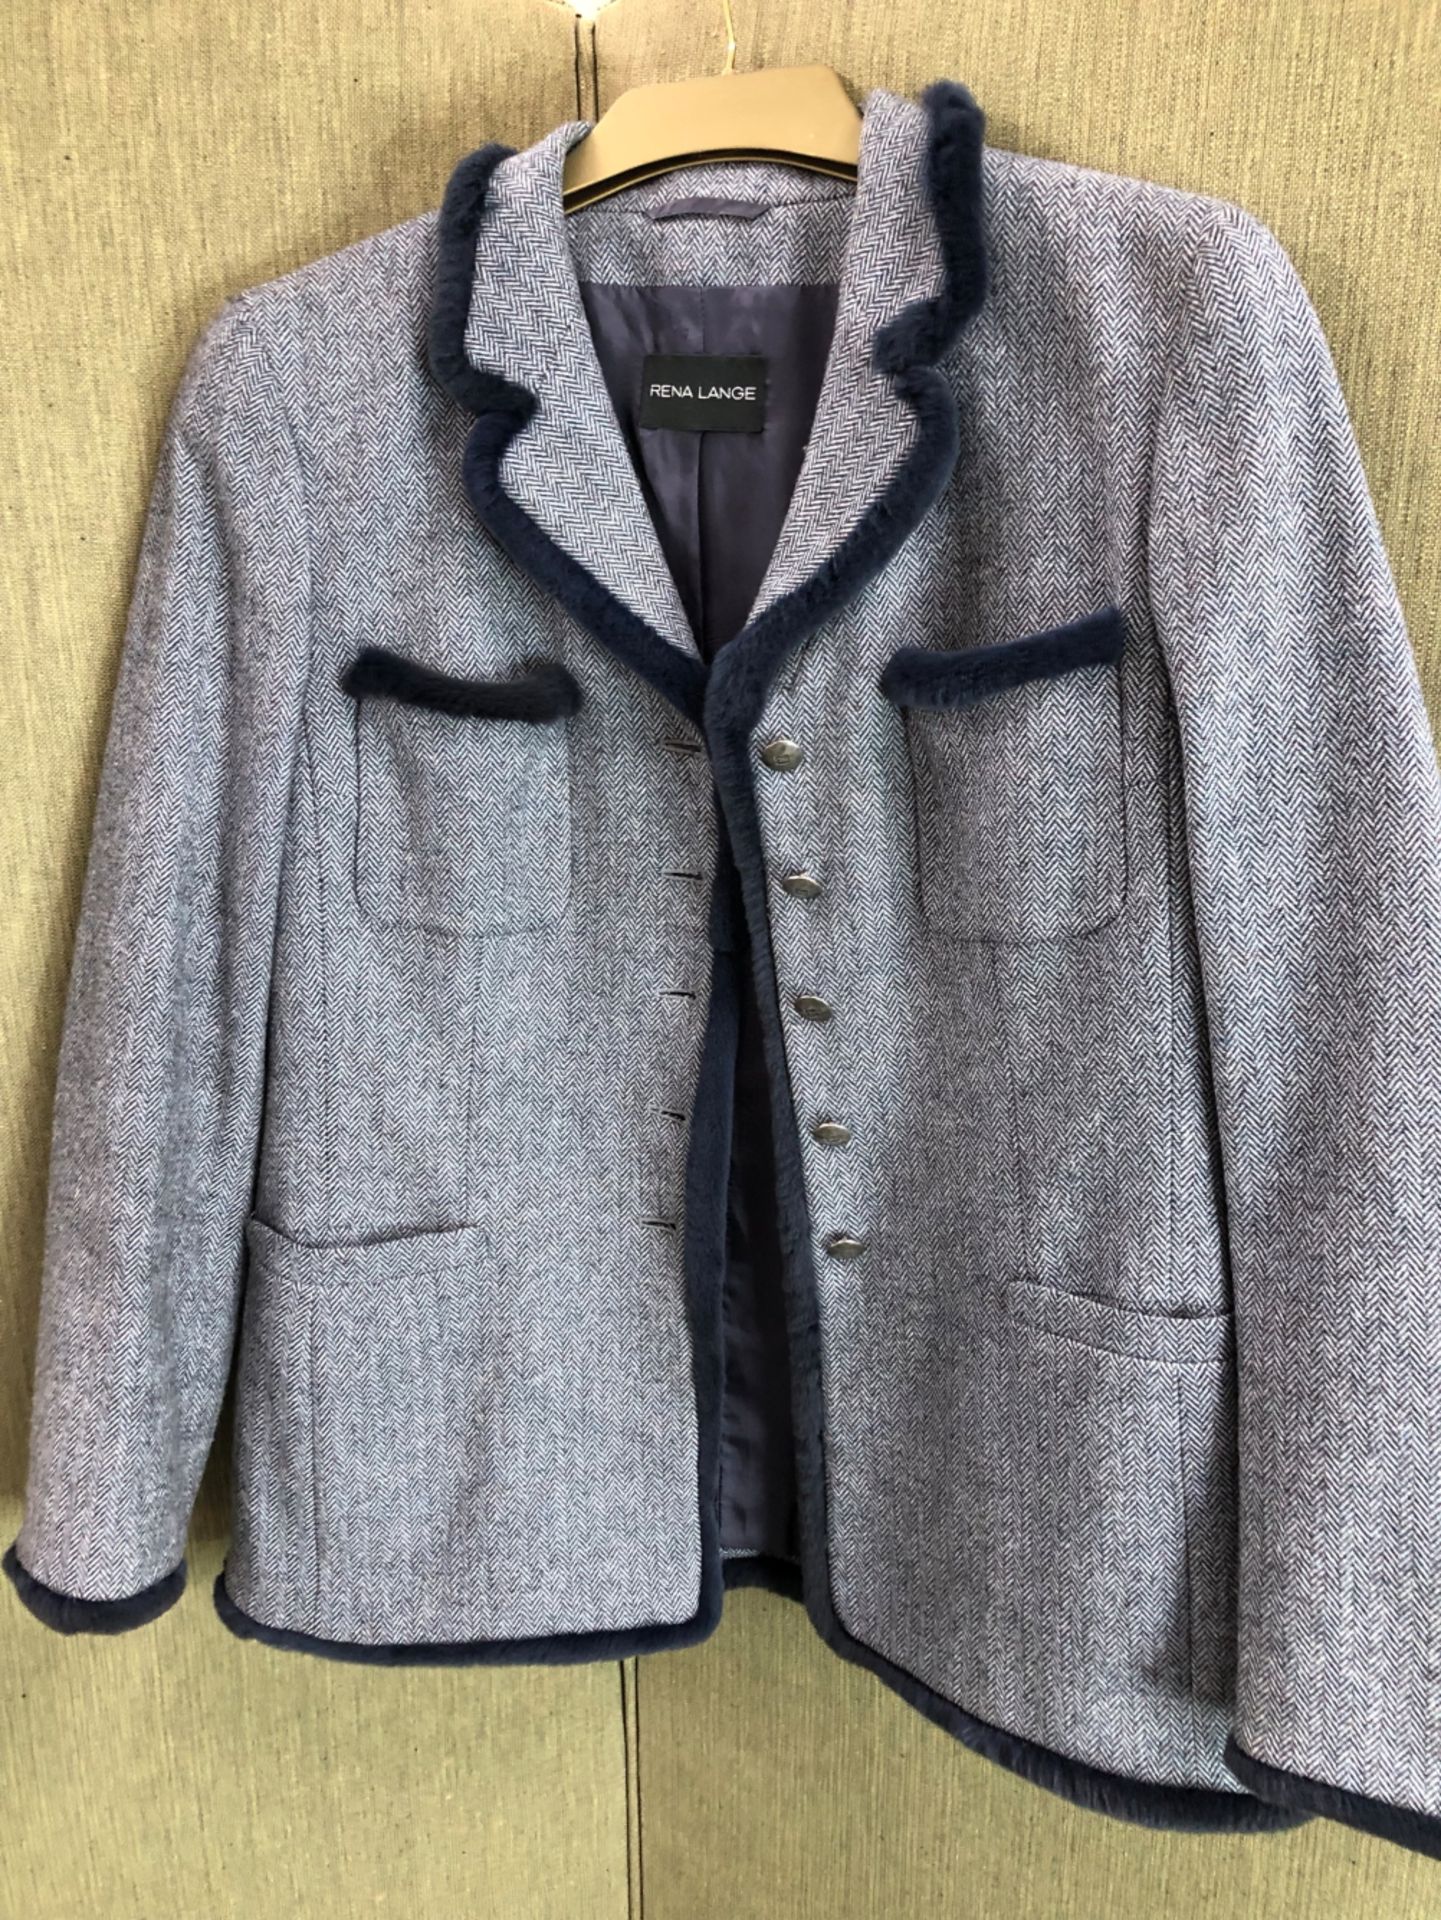 TWO RENA LANGE BLAZERS AND A SKIRT, A BLUE TWEED WITH FUR TRIM, GB 44, THE OTHER NAVY AND WHITE - Image 12 of 16